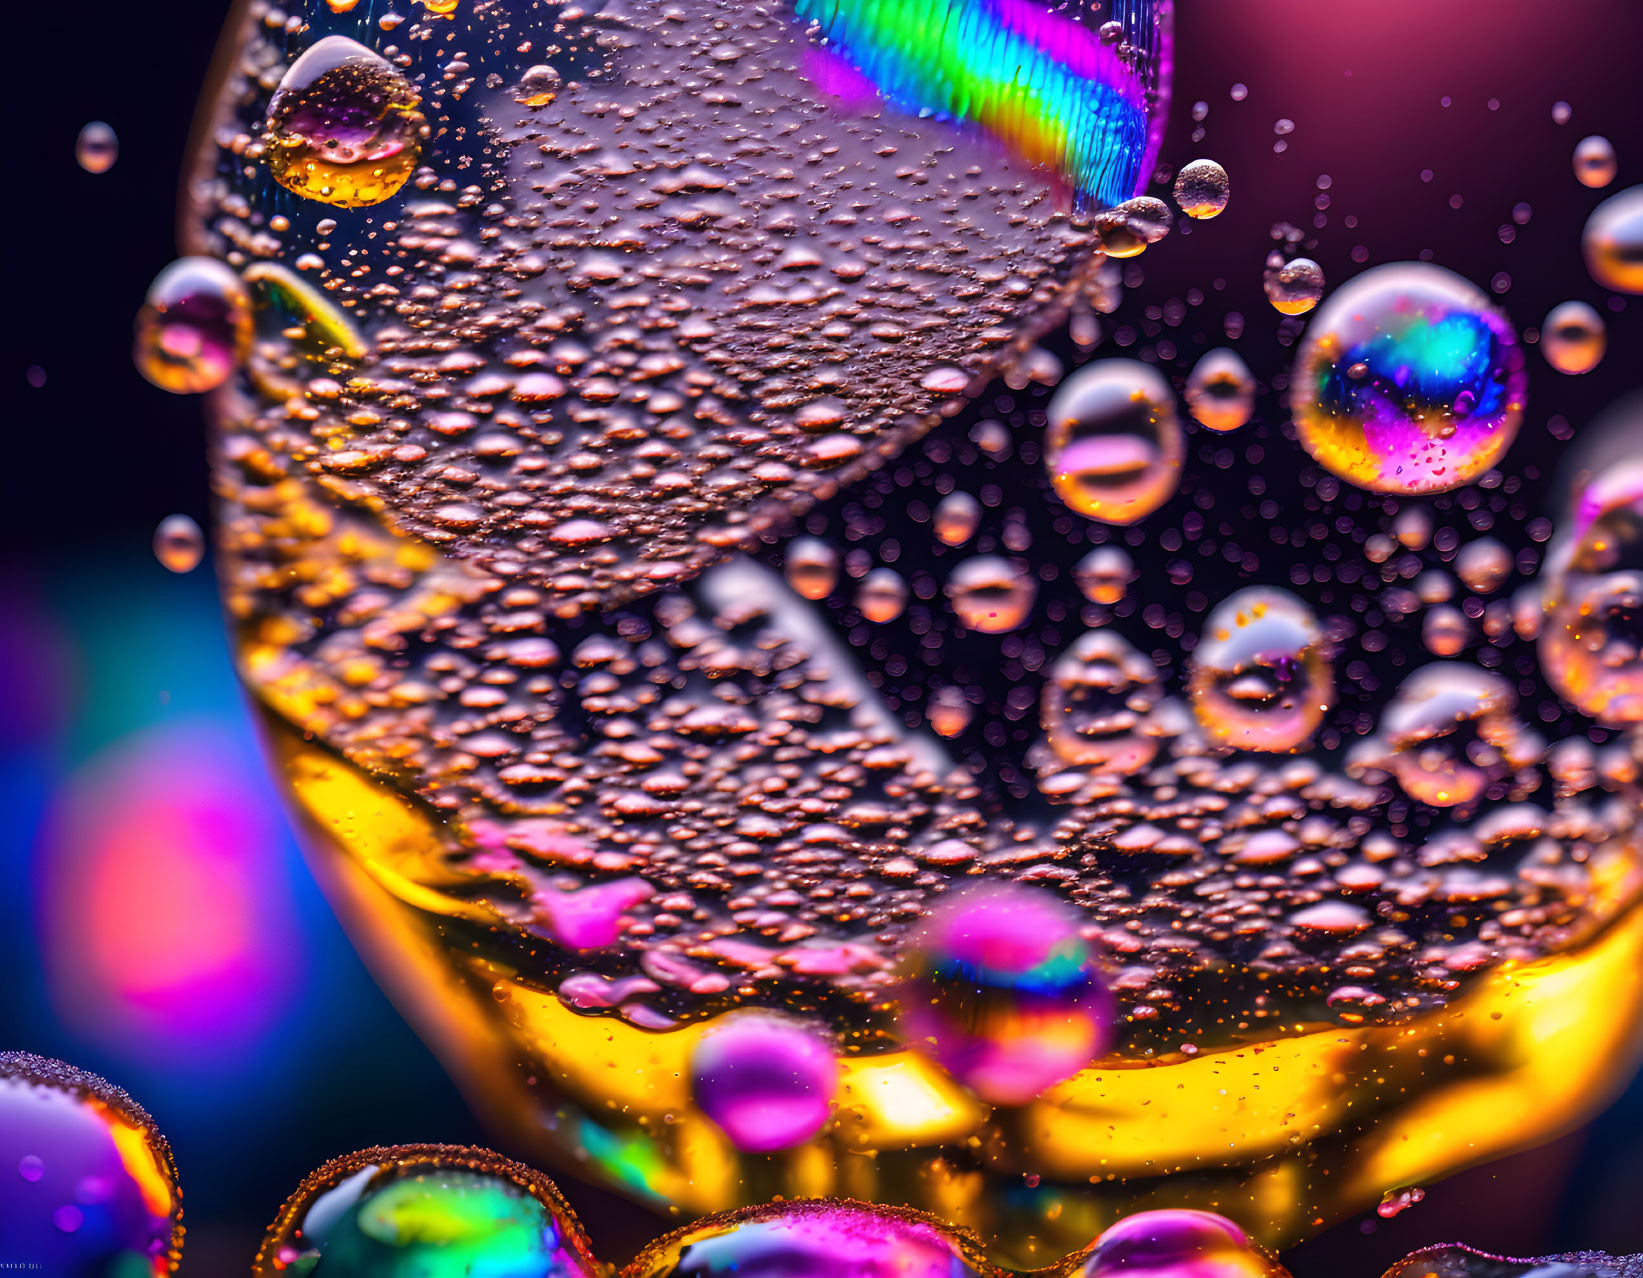 Colorful water droplets on glass: vibrant rainbow hues and reflections.